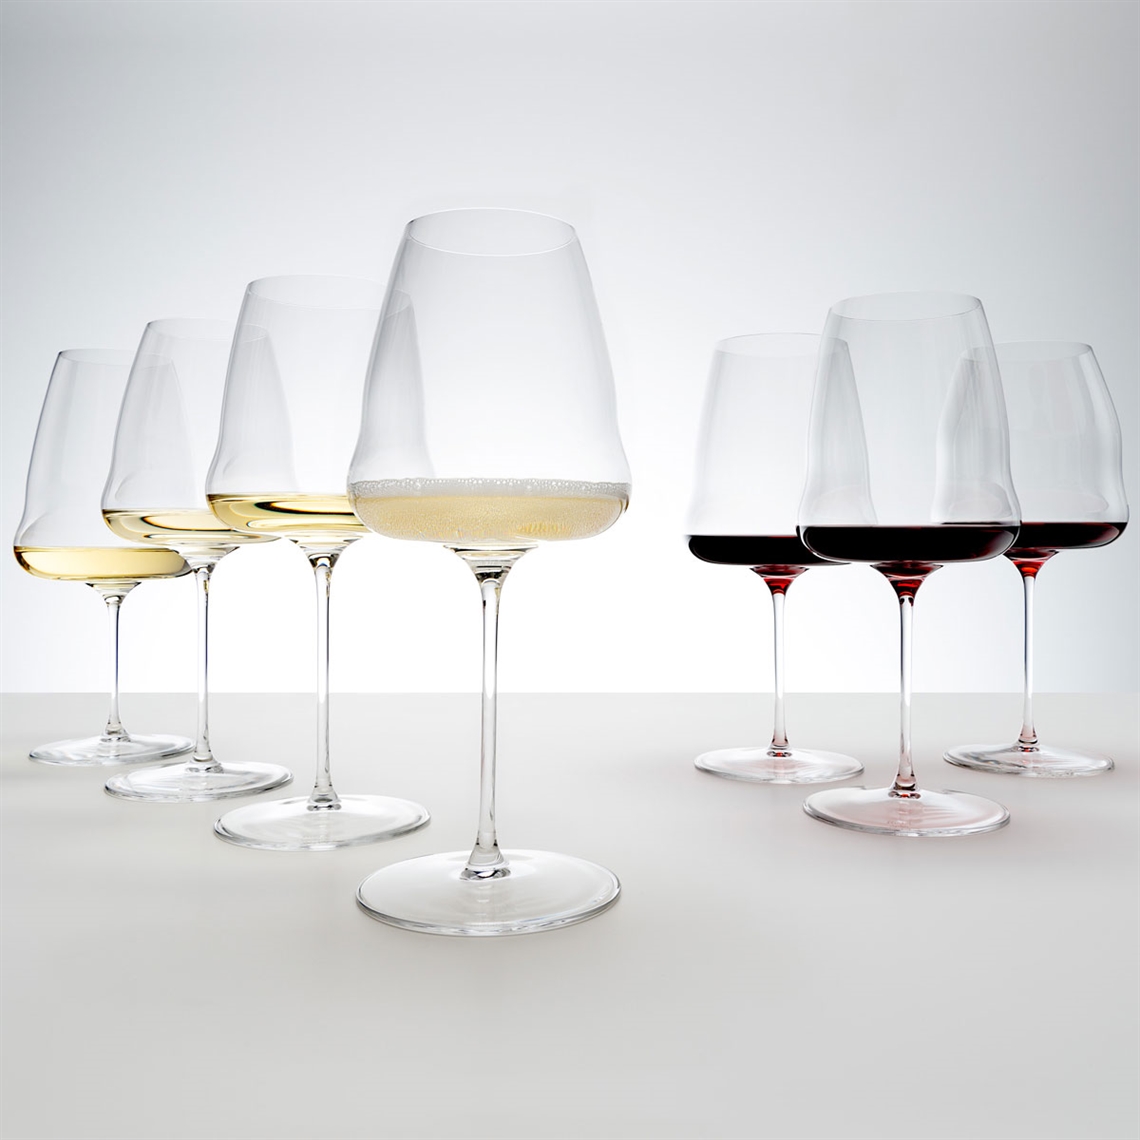 View our collection of Riedel Winewings Riedel Bar